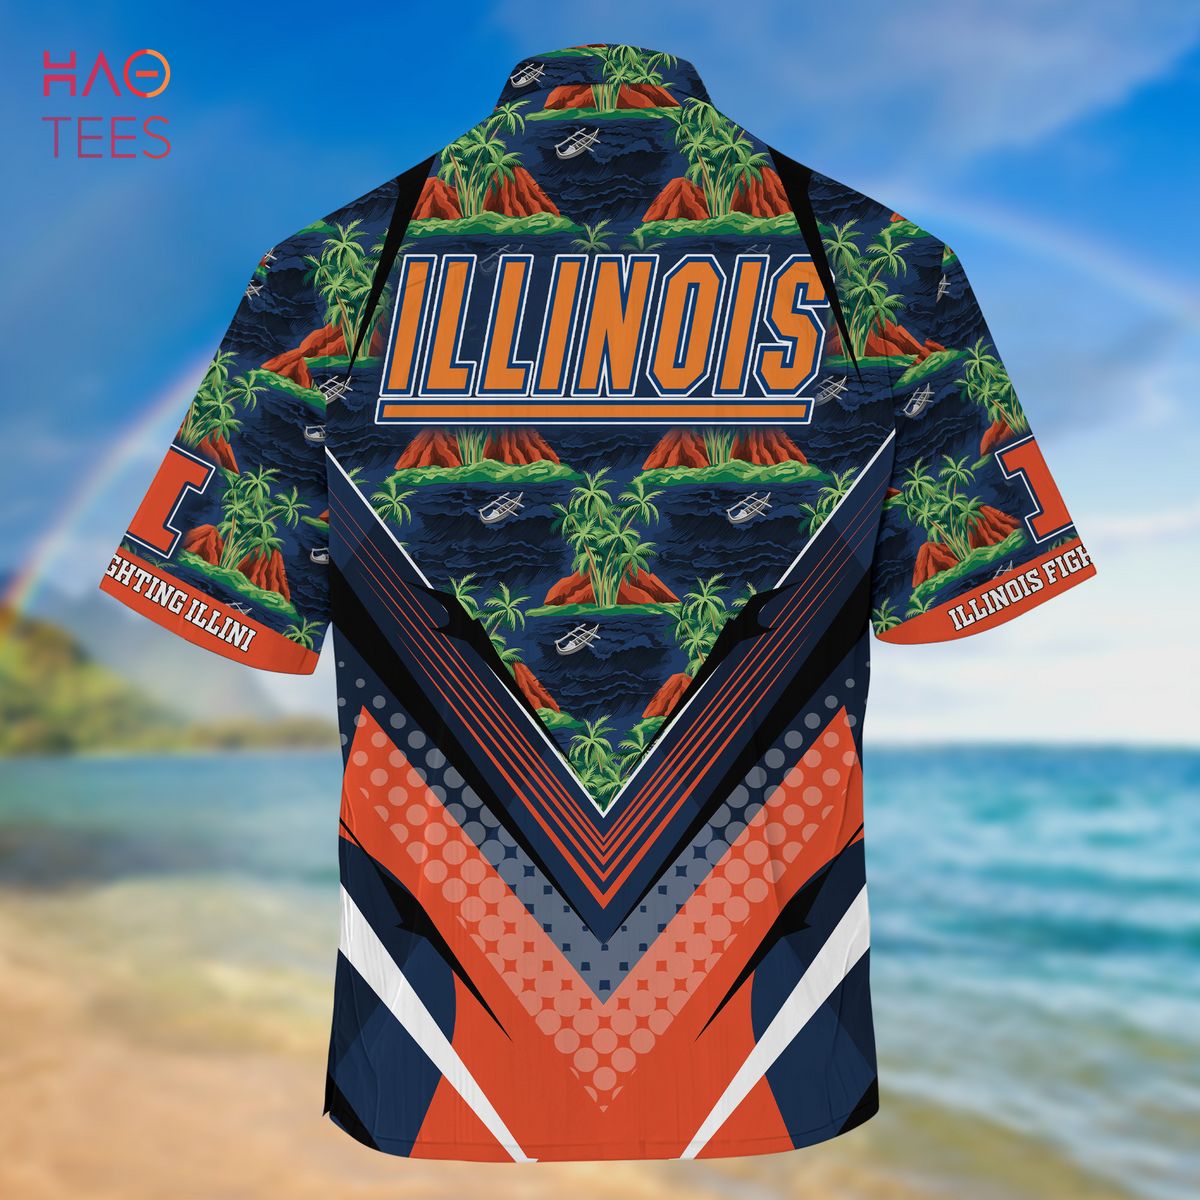 Illinois Fighting Illini rugby legends jersey